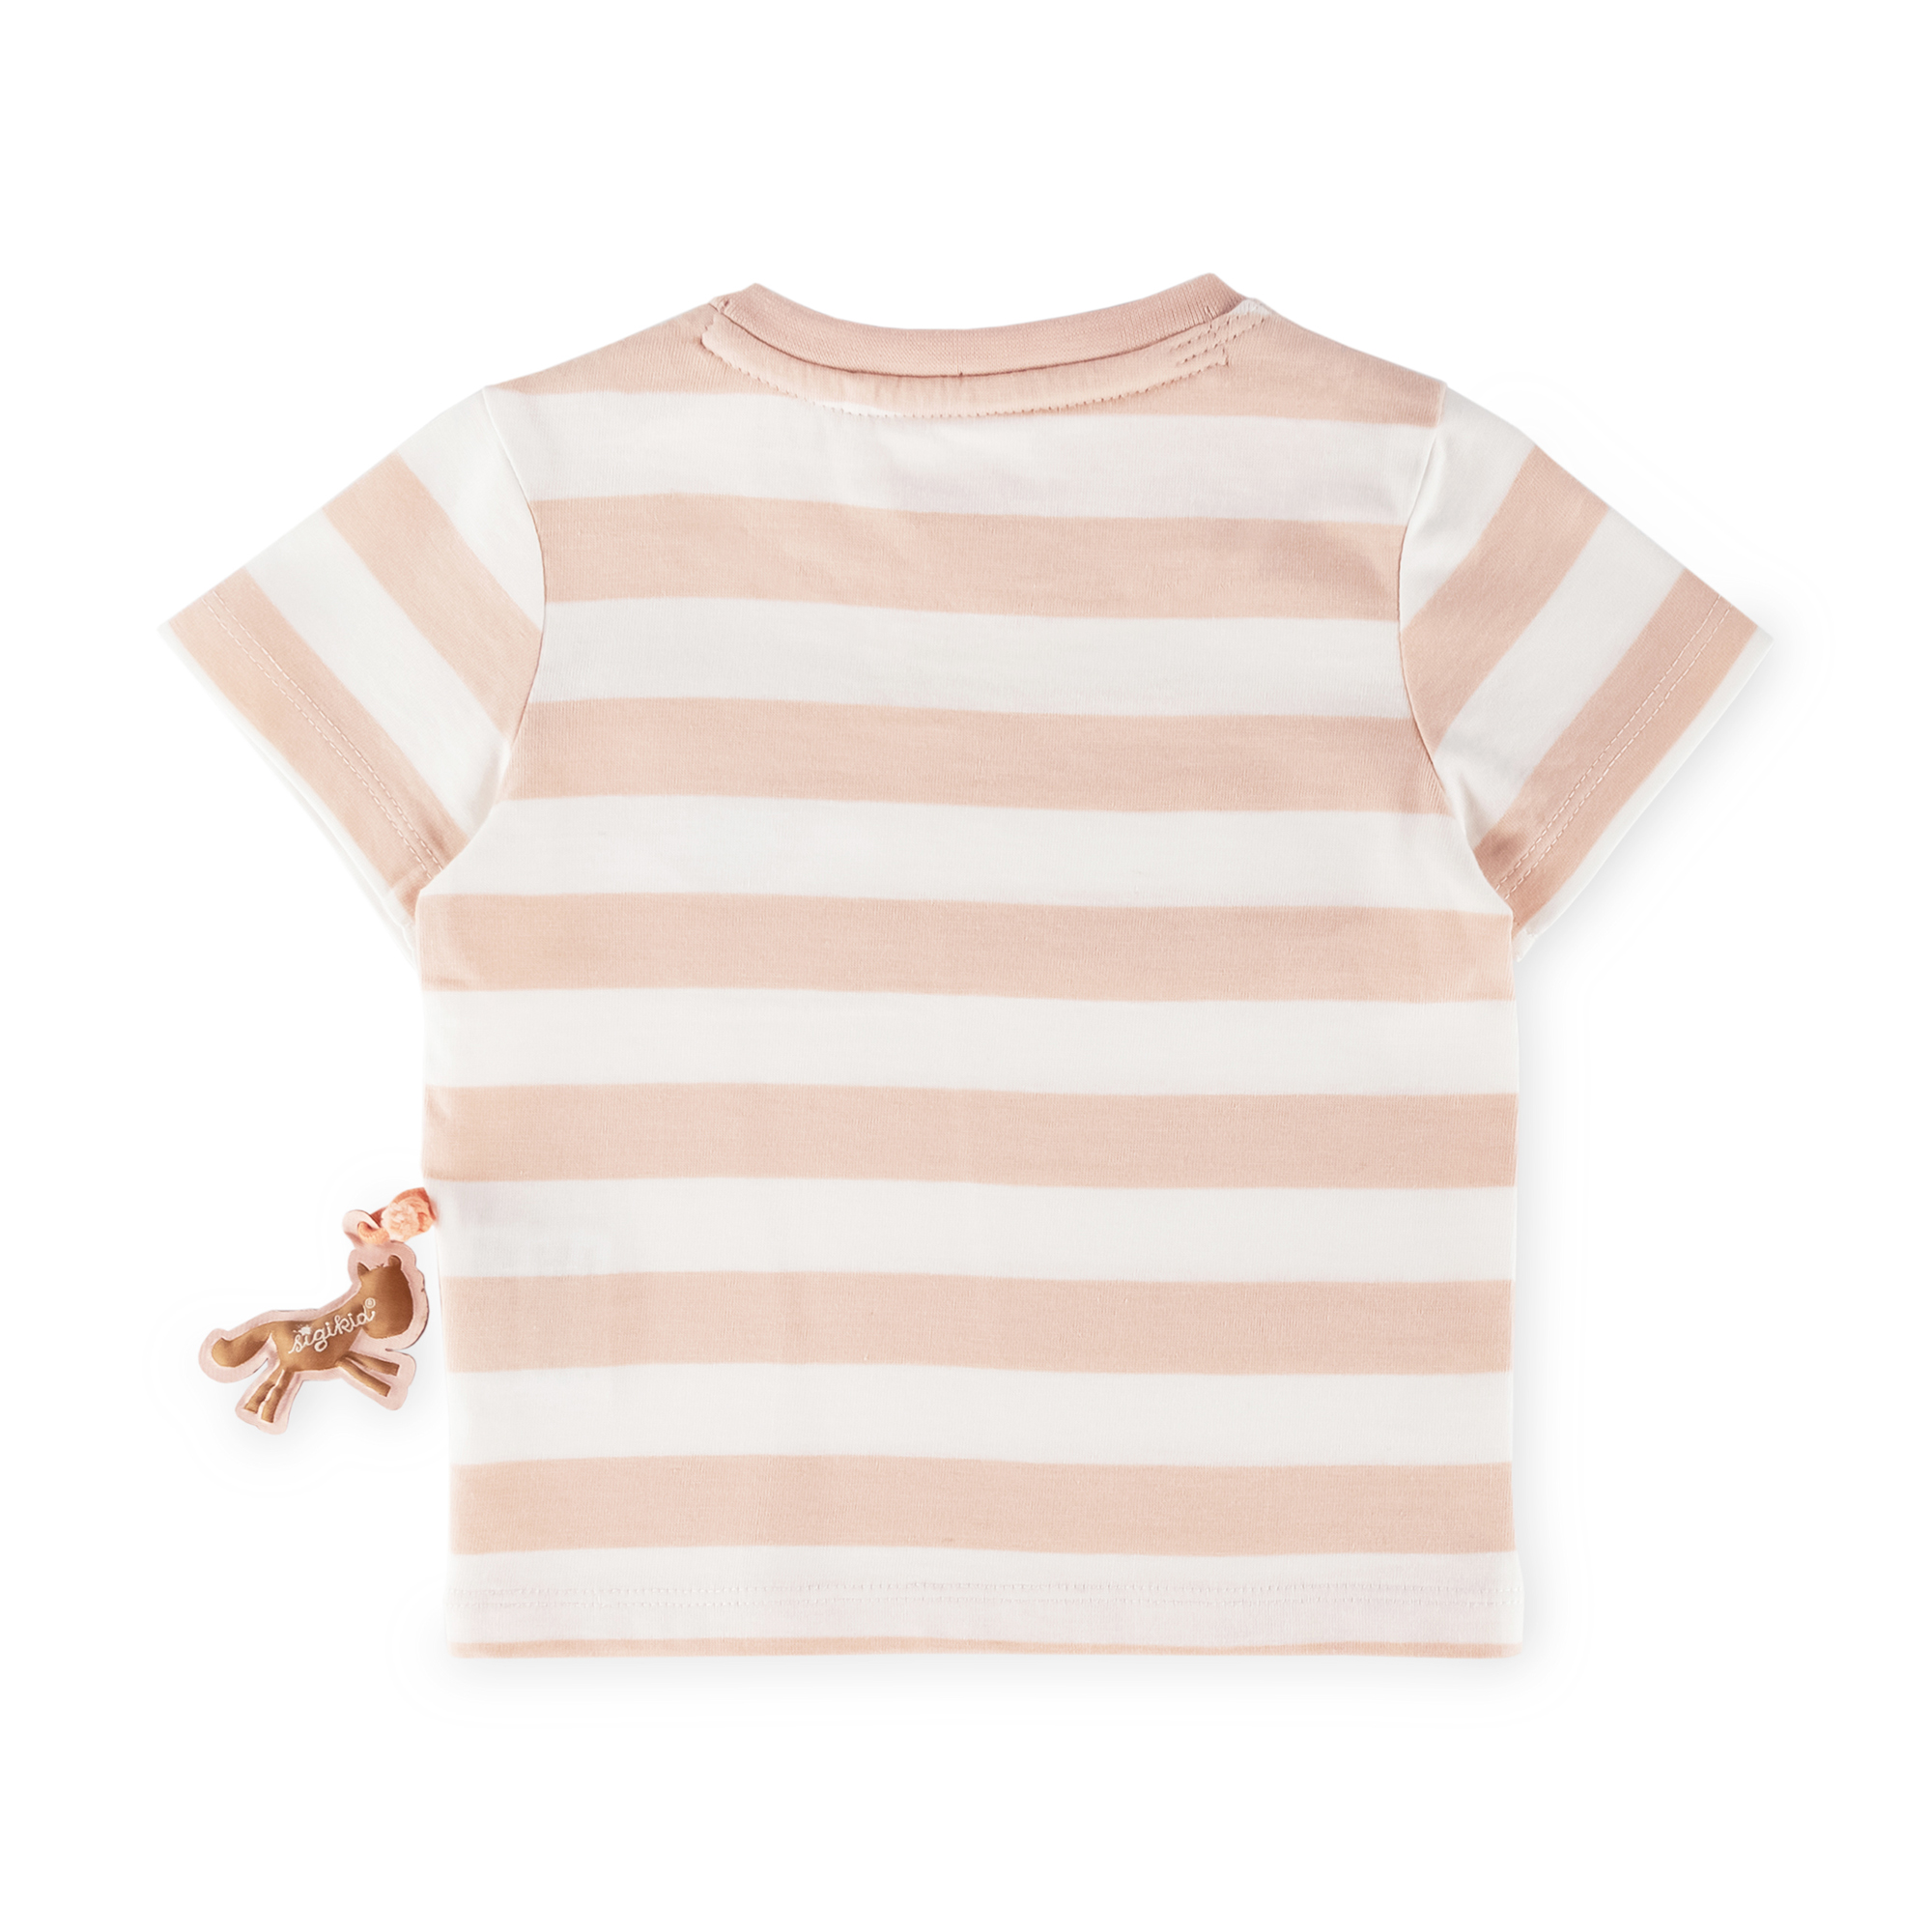 Striped baby T-shirt Funny Horse, cream/pale pink